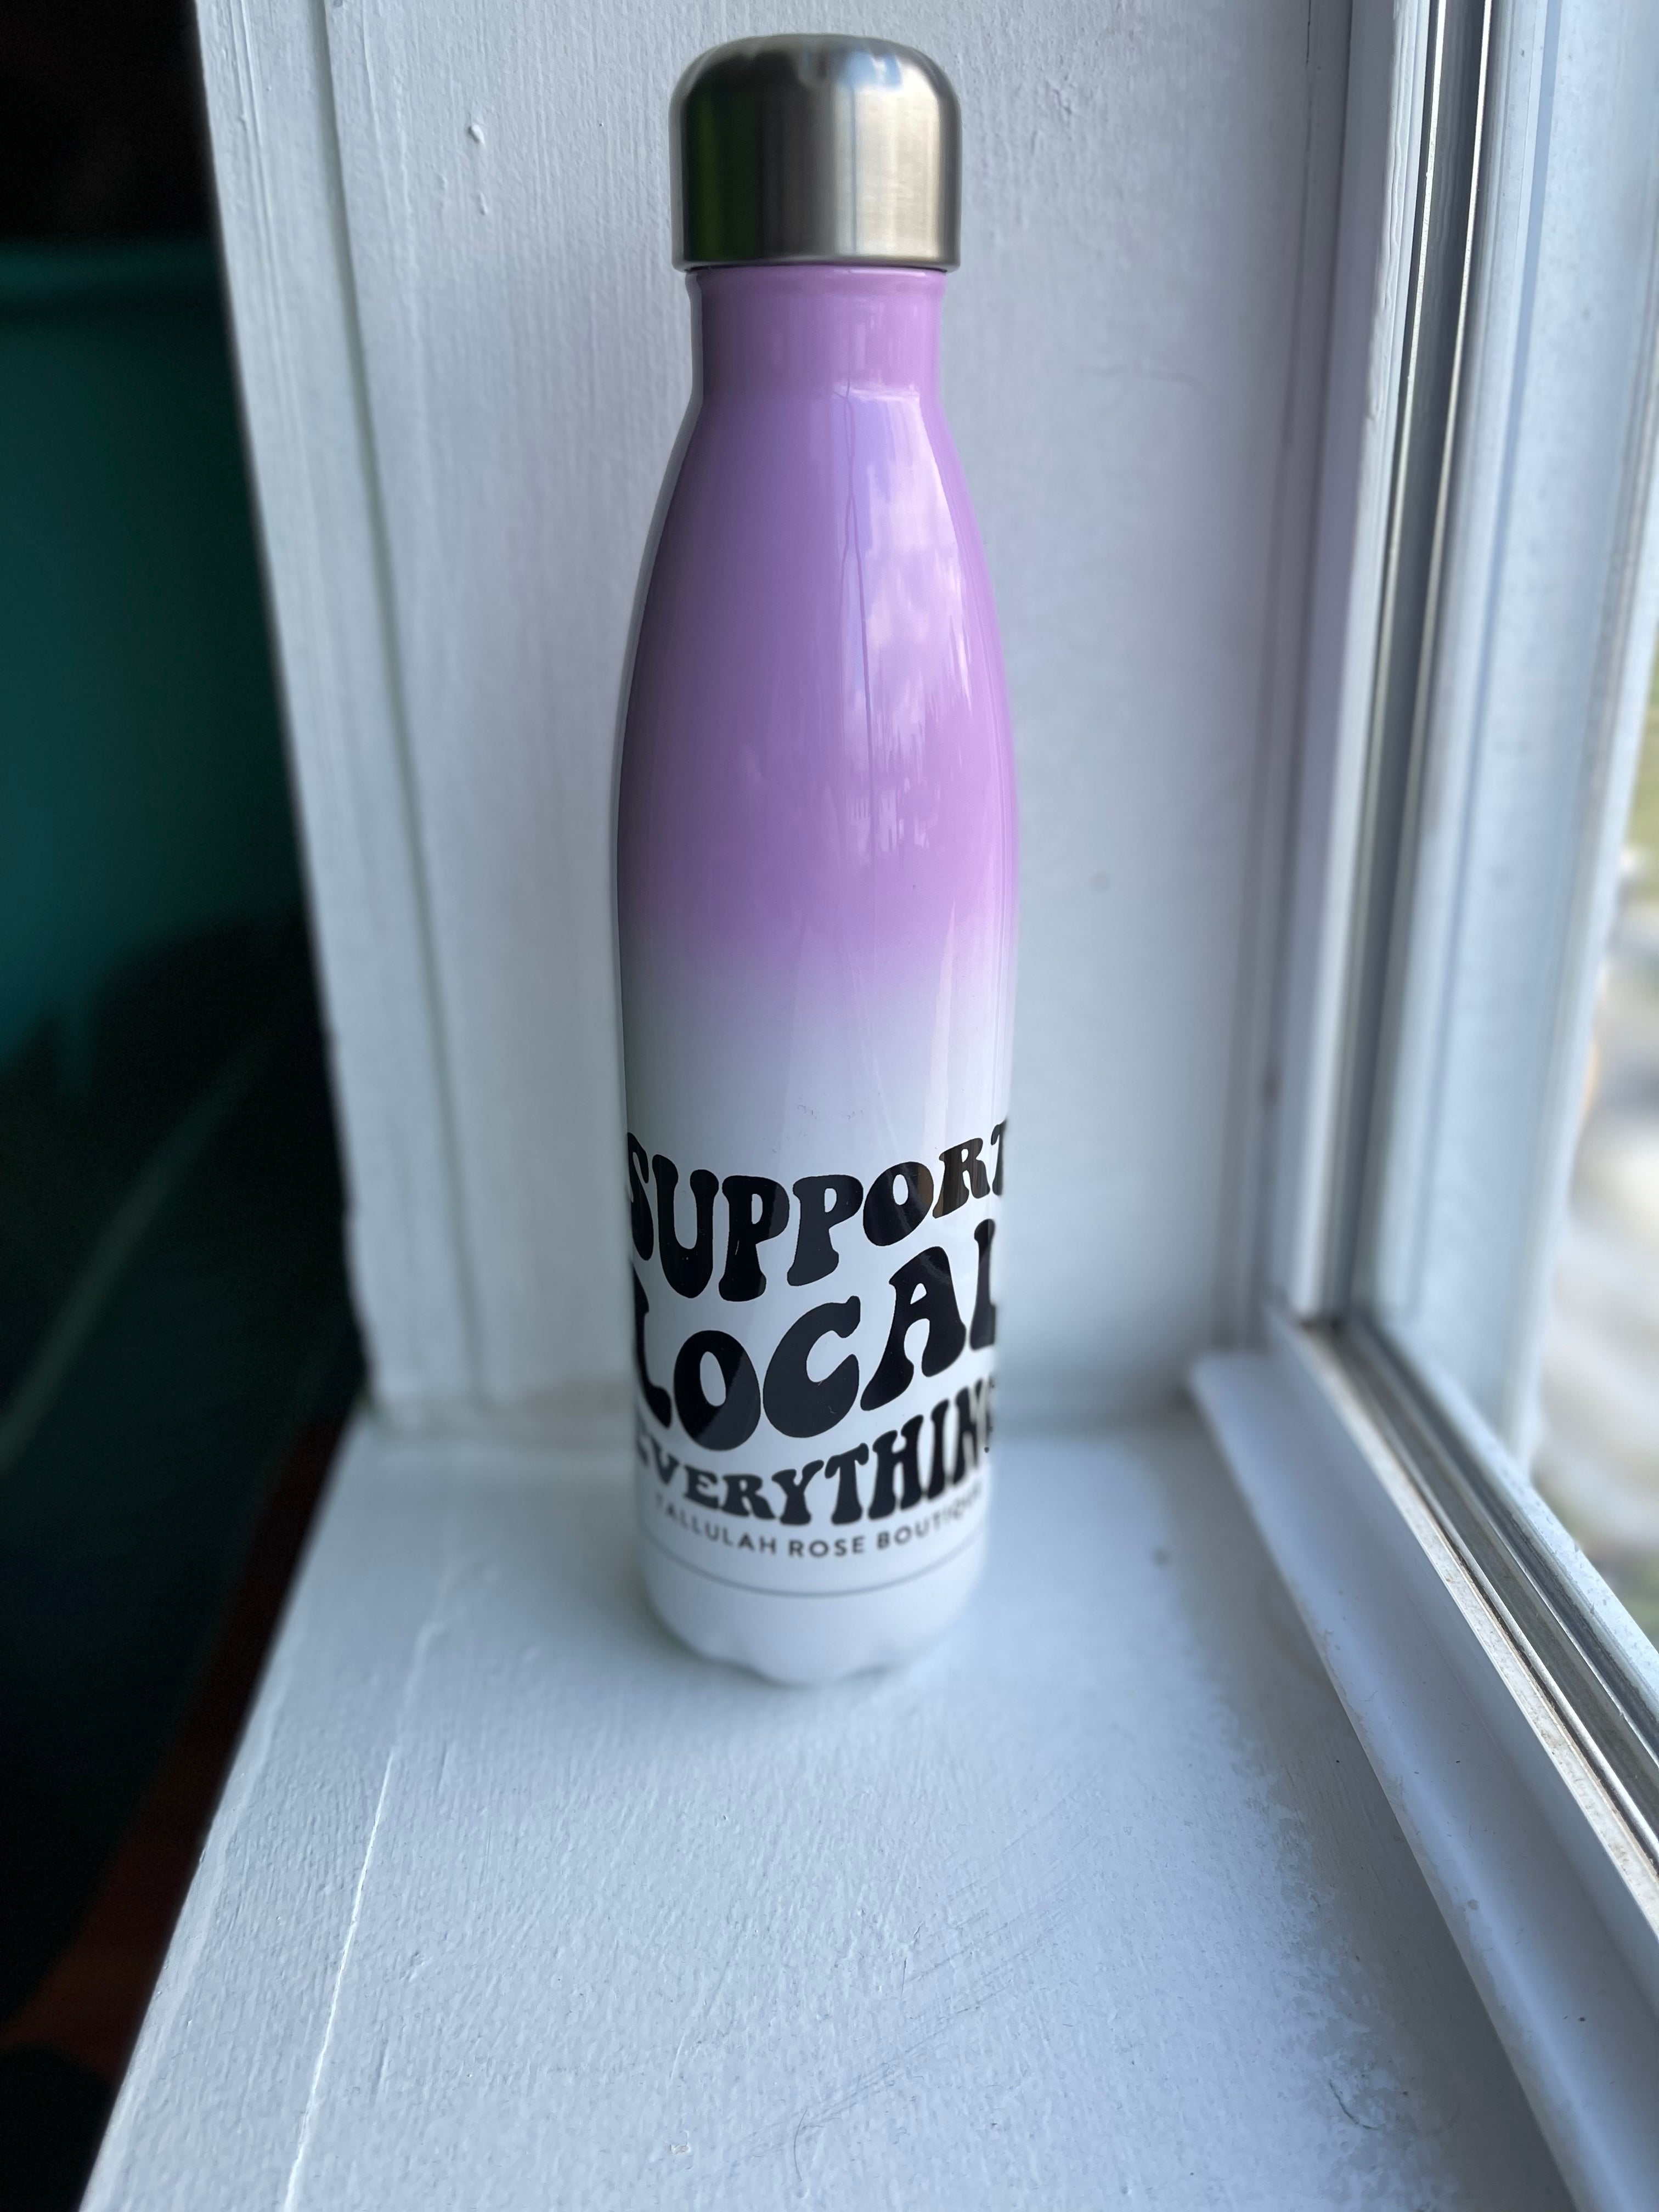 Support Local Everything Bottle